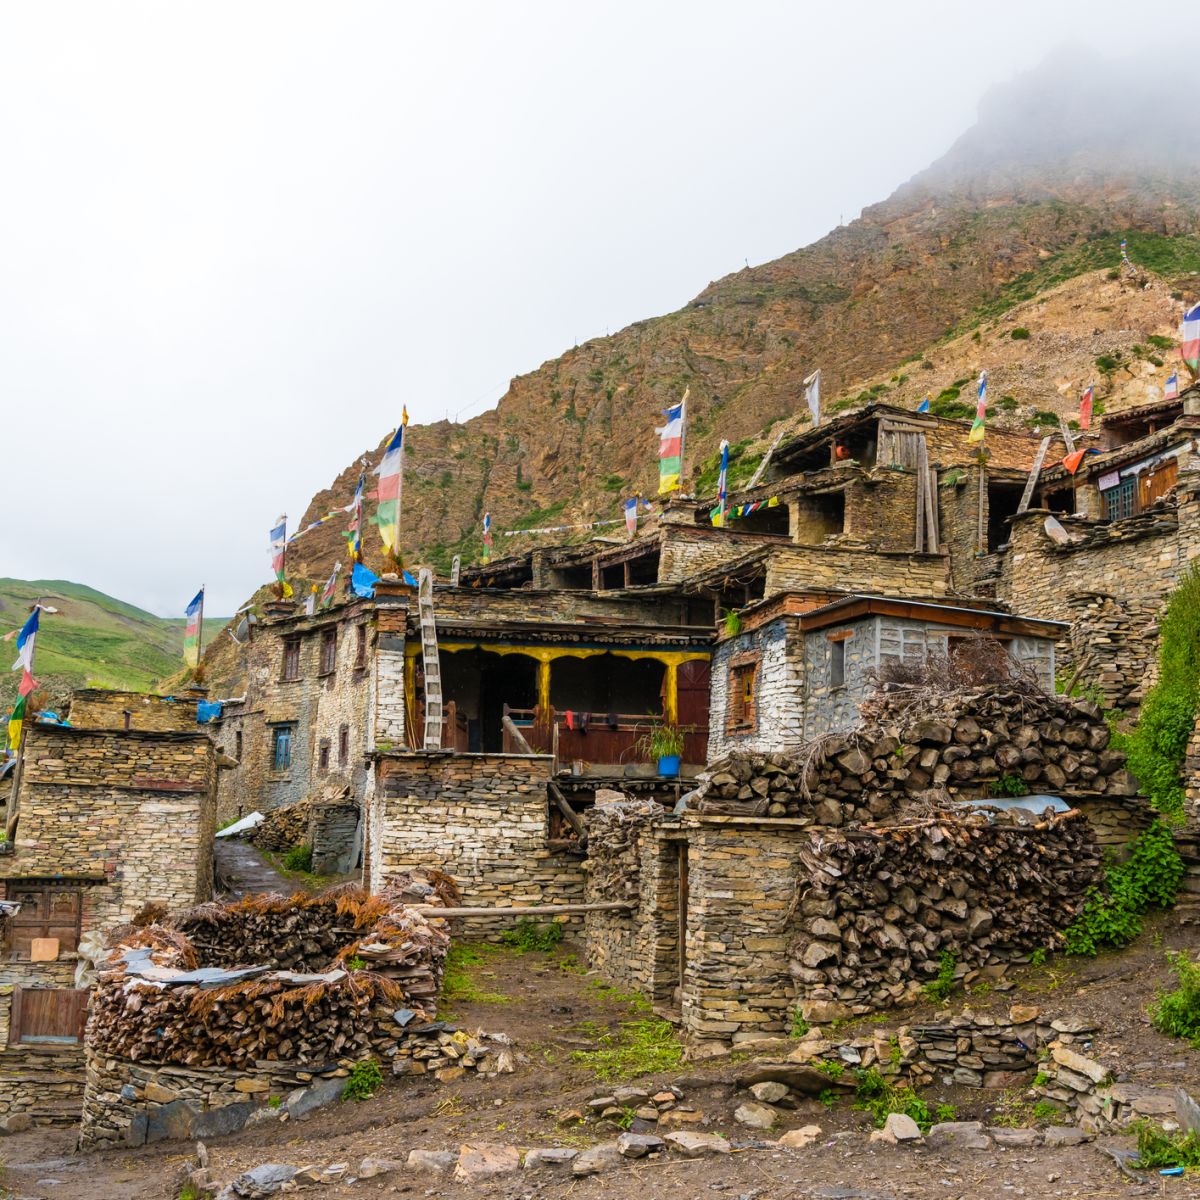 Traditional architecture in the ancient Tibetan Nar village, Annapurna Conservation Area, Nepal